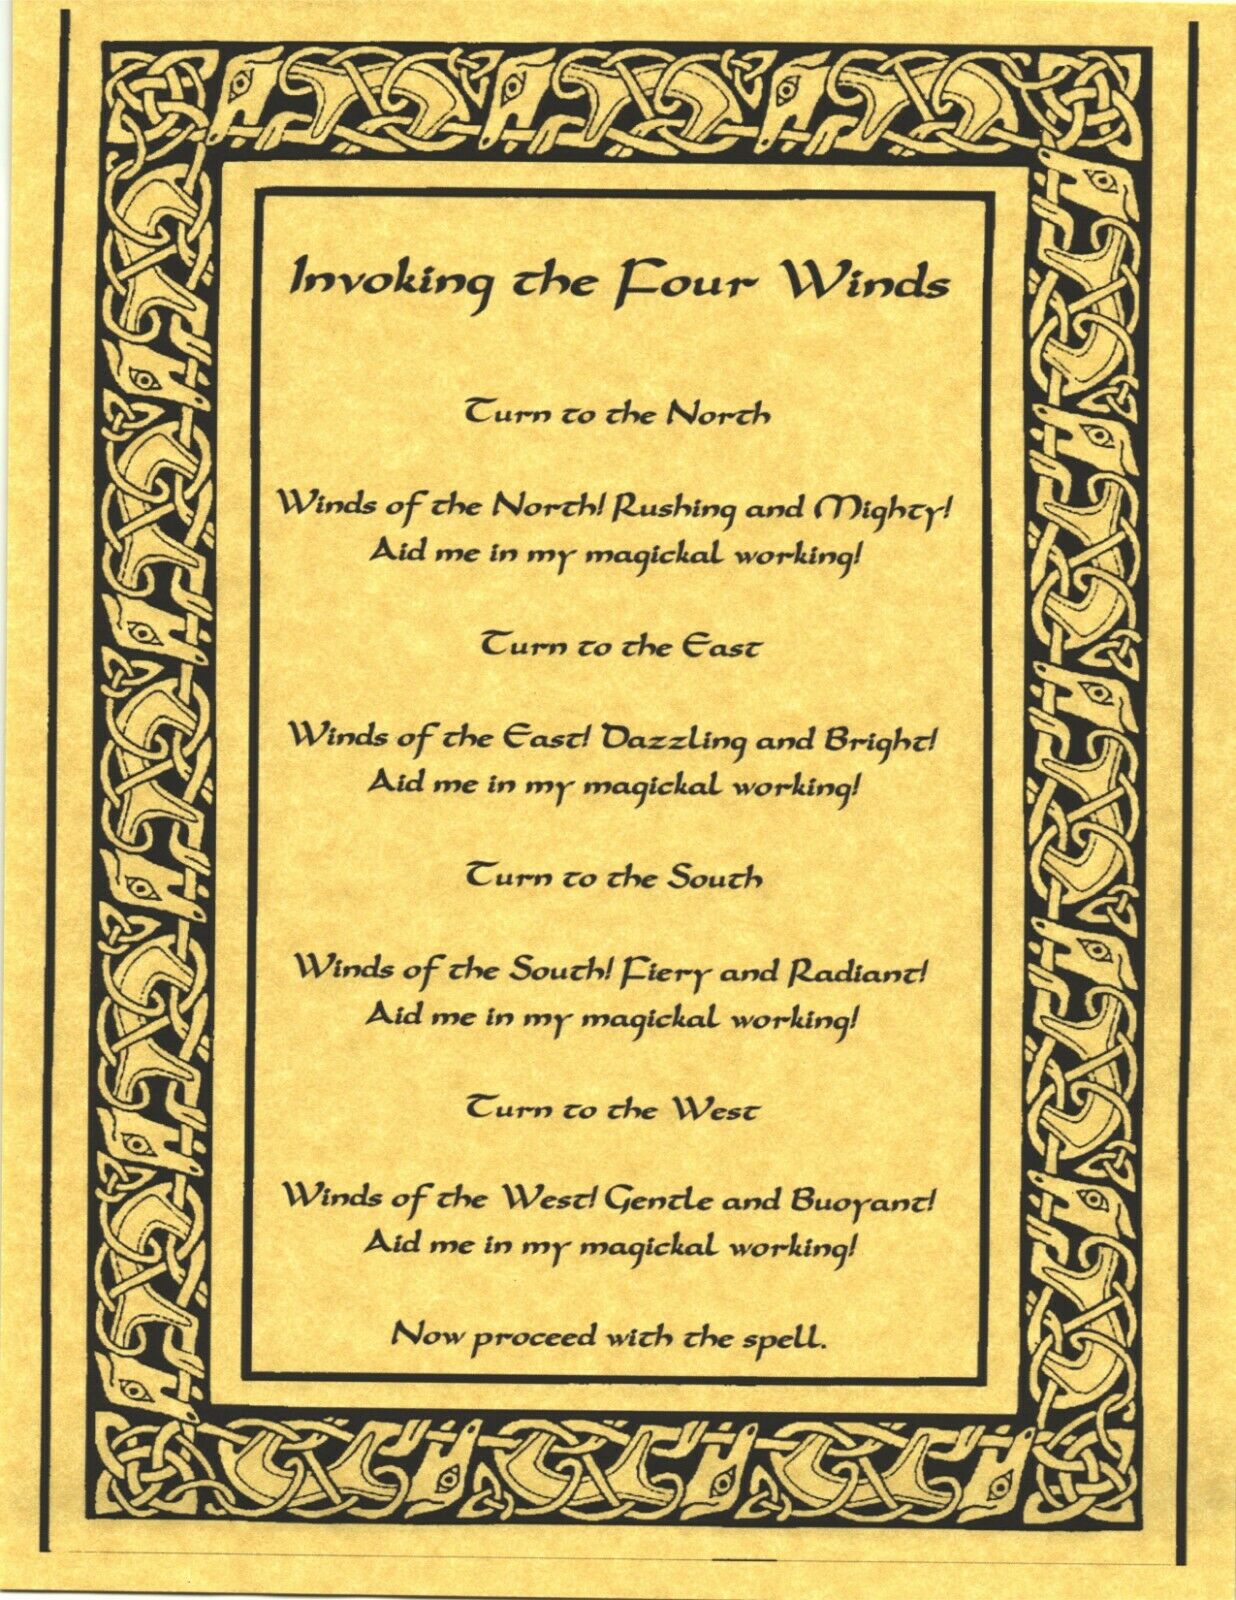 Book Of Shadows Page - Invoking The Four Winds- Wicca Witchcraft Spells Magic